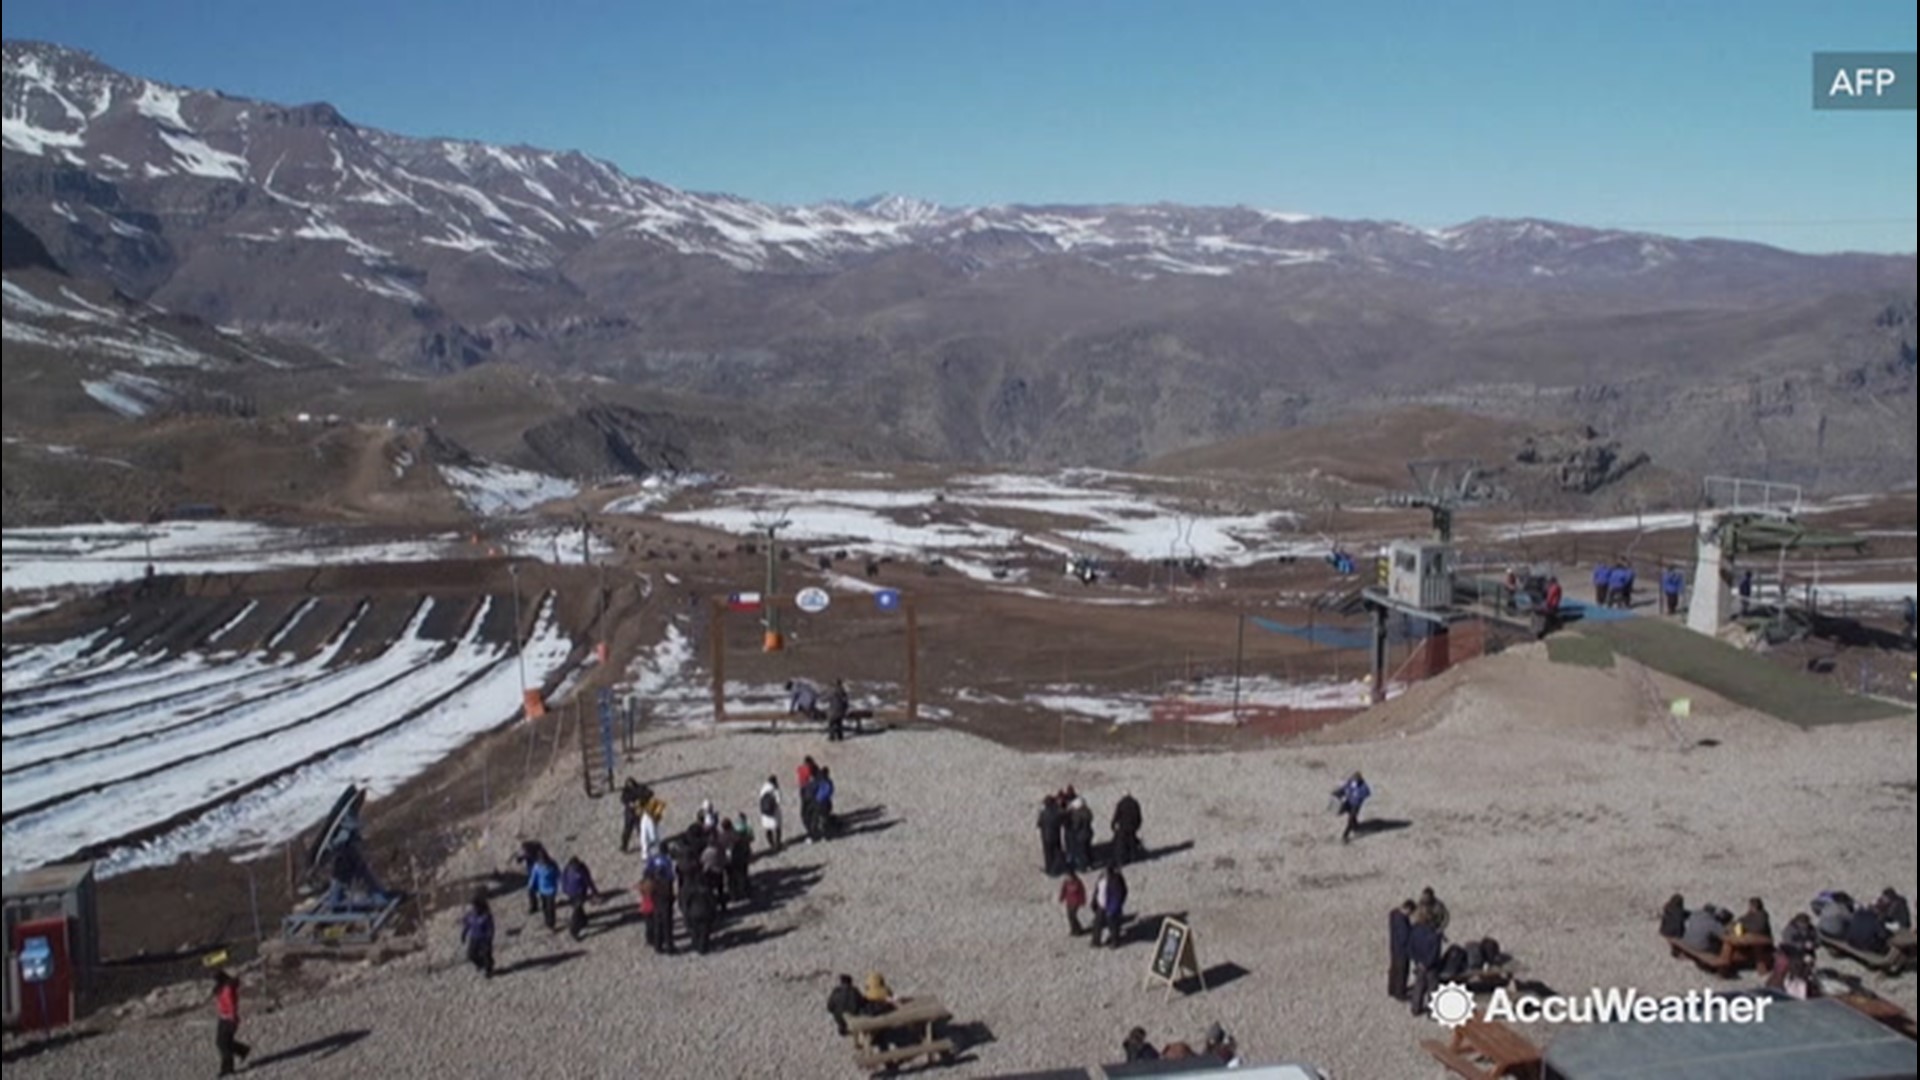 Ski resorts near Santiago, Chile, have resorted to using artificial snow as this winter continues to be unusually dry. Local reports indicate that this is the driest winter the area has seen in nearly six decades.